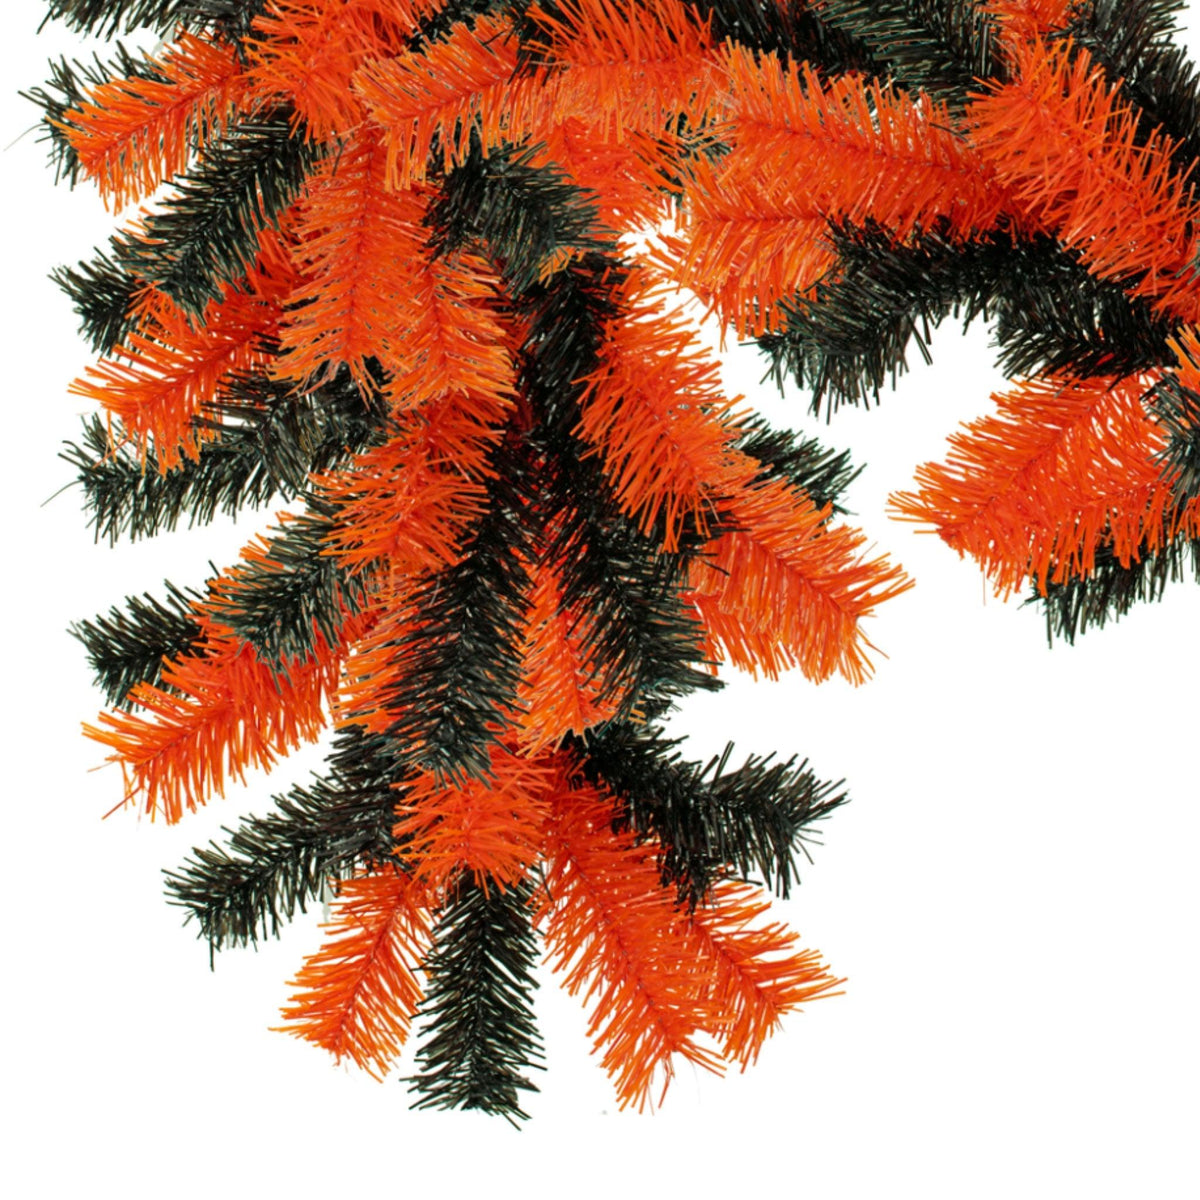 Shop for Lee Display's brand new 6FT Orange and Black Halloween Tinsel Brush Garlands on sale now at leedisplay.com.  1 Section